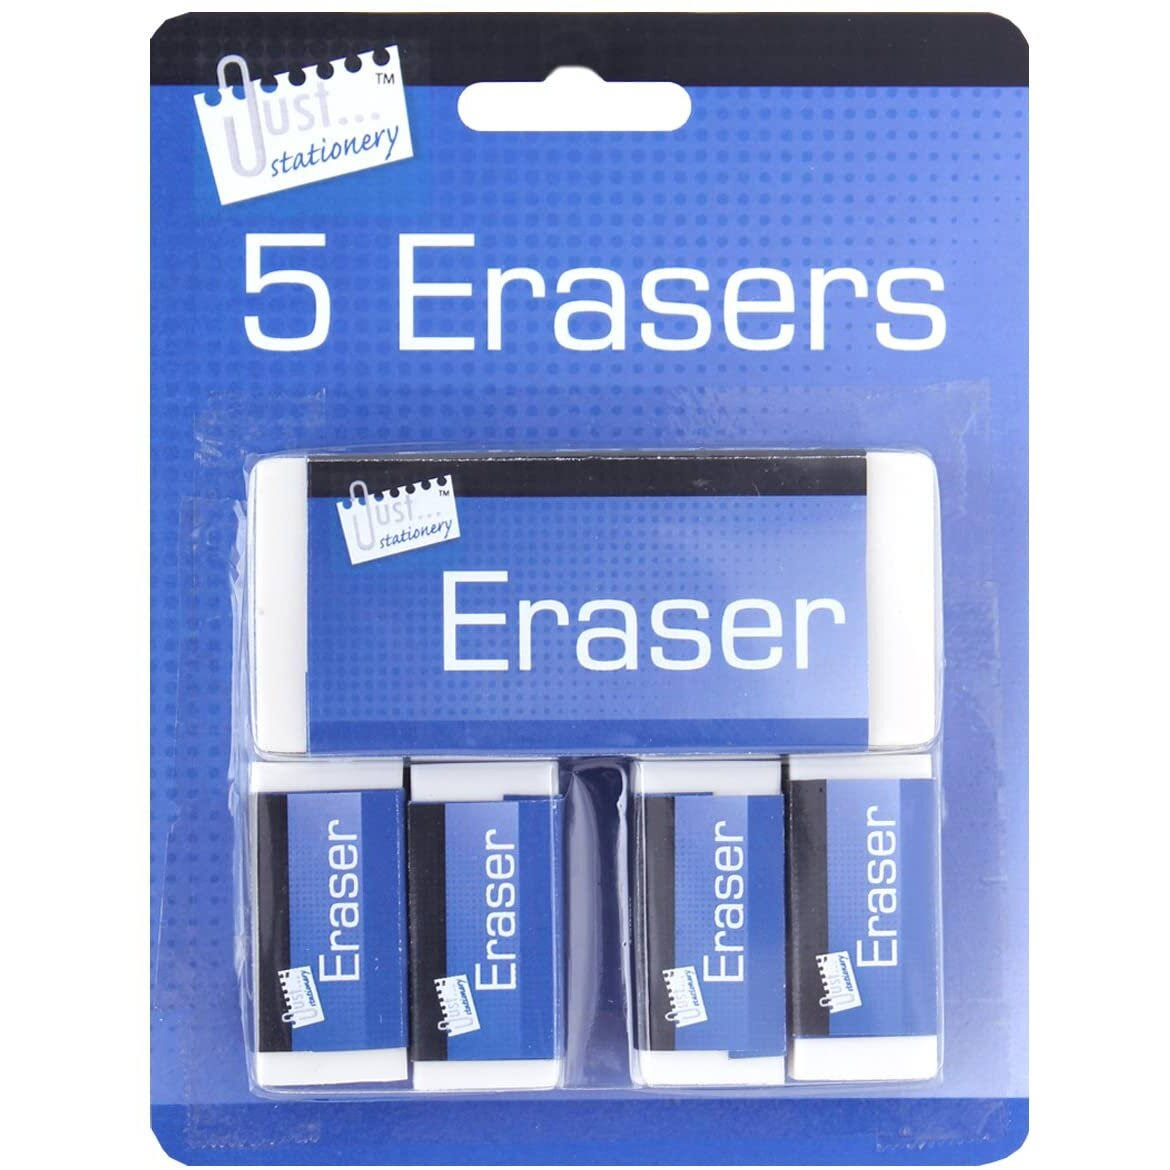 Just Stationery Quality Rubber Eraser - White, 5pcs